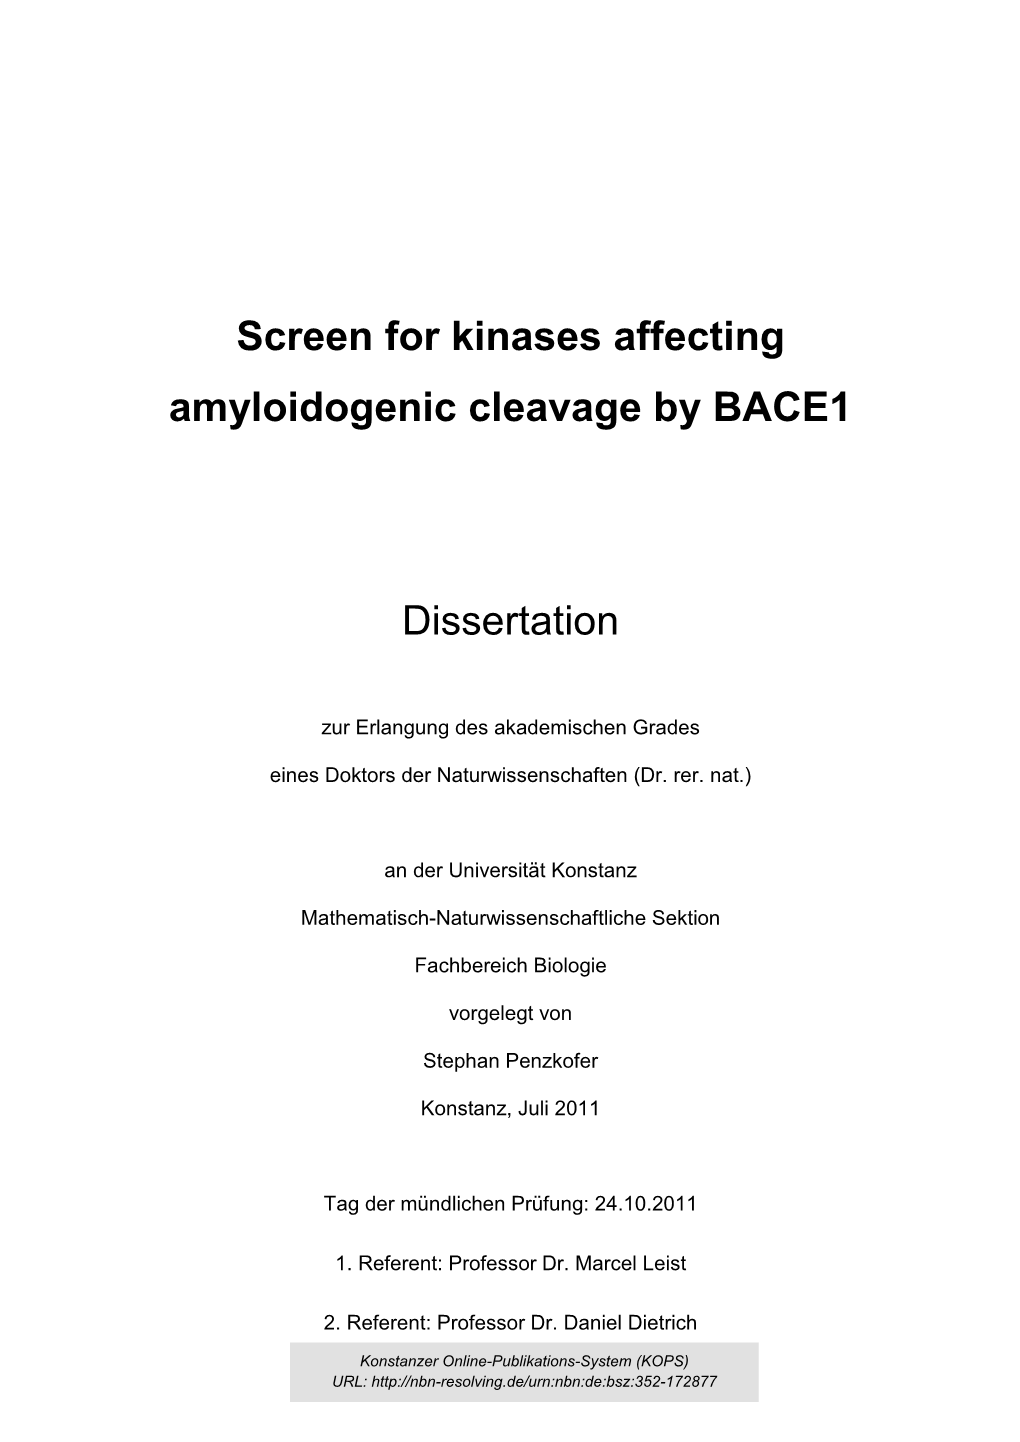 Screen for Kinases Affecting Amyloidogenic Cleavage by BACE1